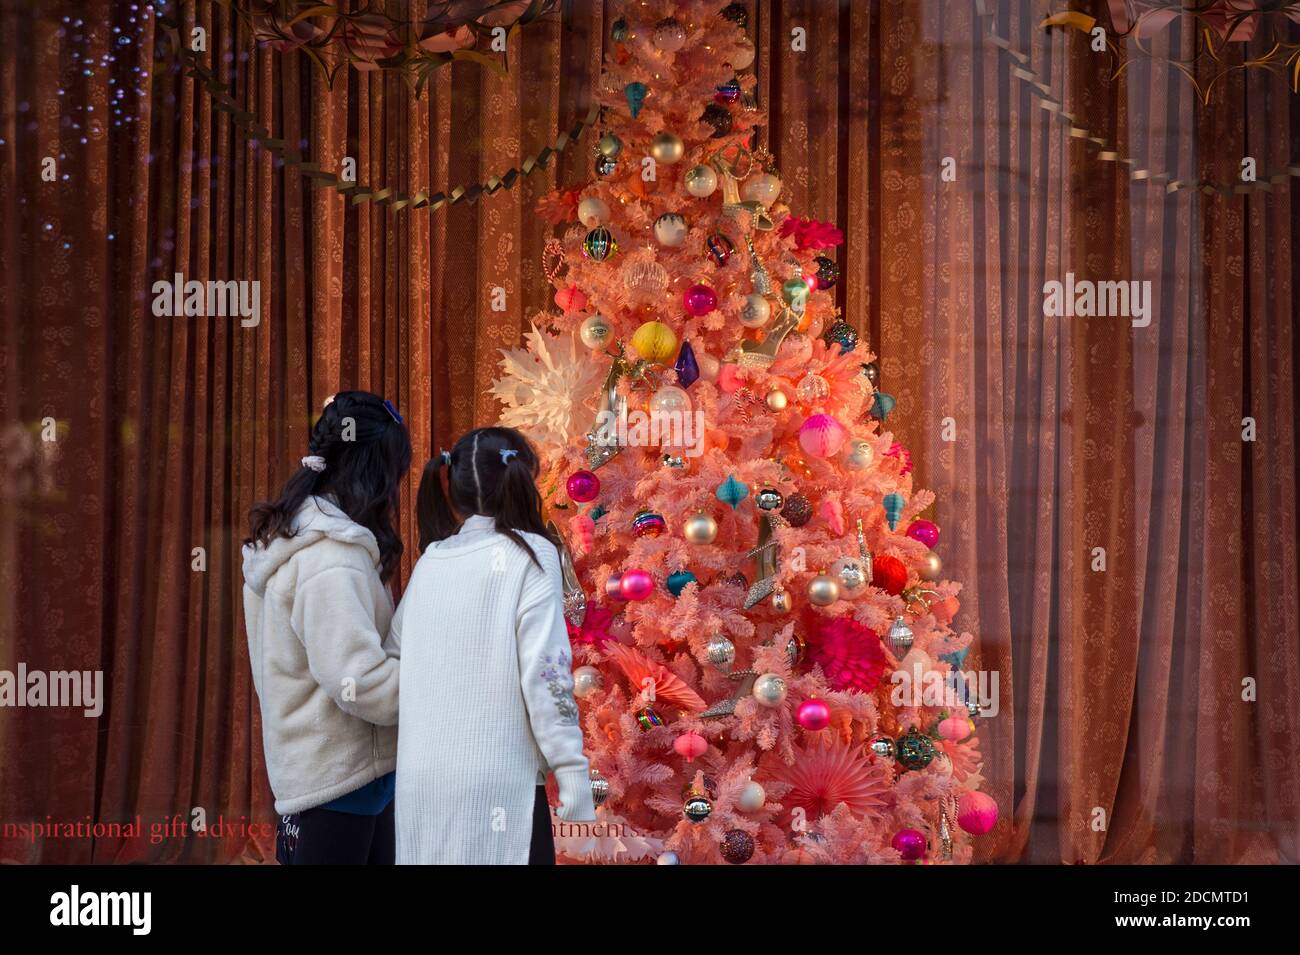 London, UK. 22 November 2020. Women view a Christmas tree in the window of  Selfridges department store on Oxford Street. The UK government is due to  ease certain coronavirus pandemic lockdown restrictions